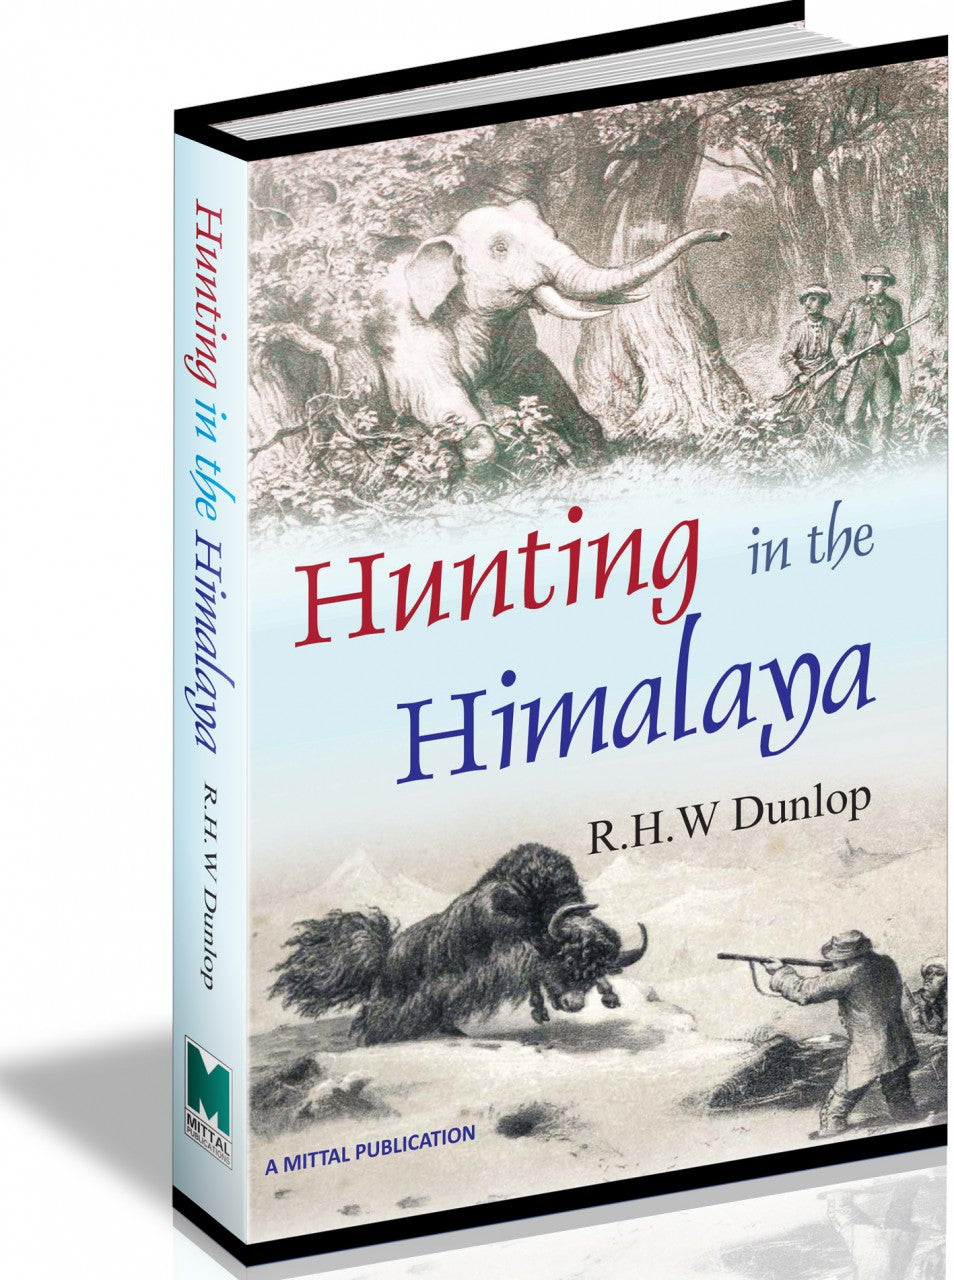 Hunting in the Himalaya - R.H.W Dunlop